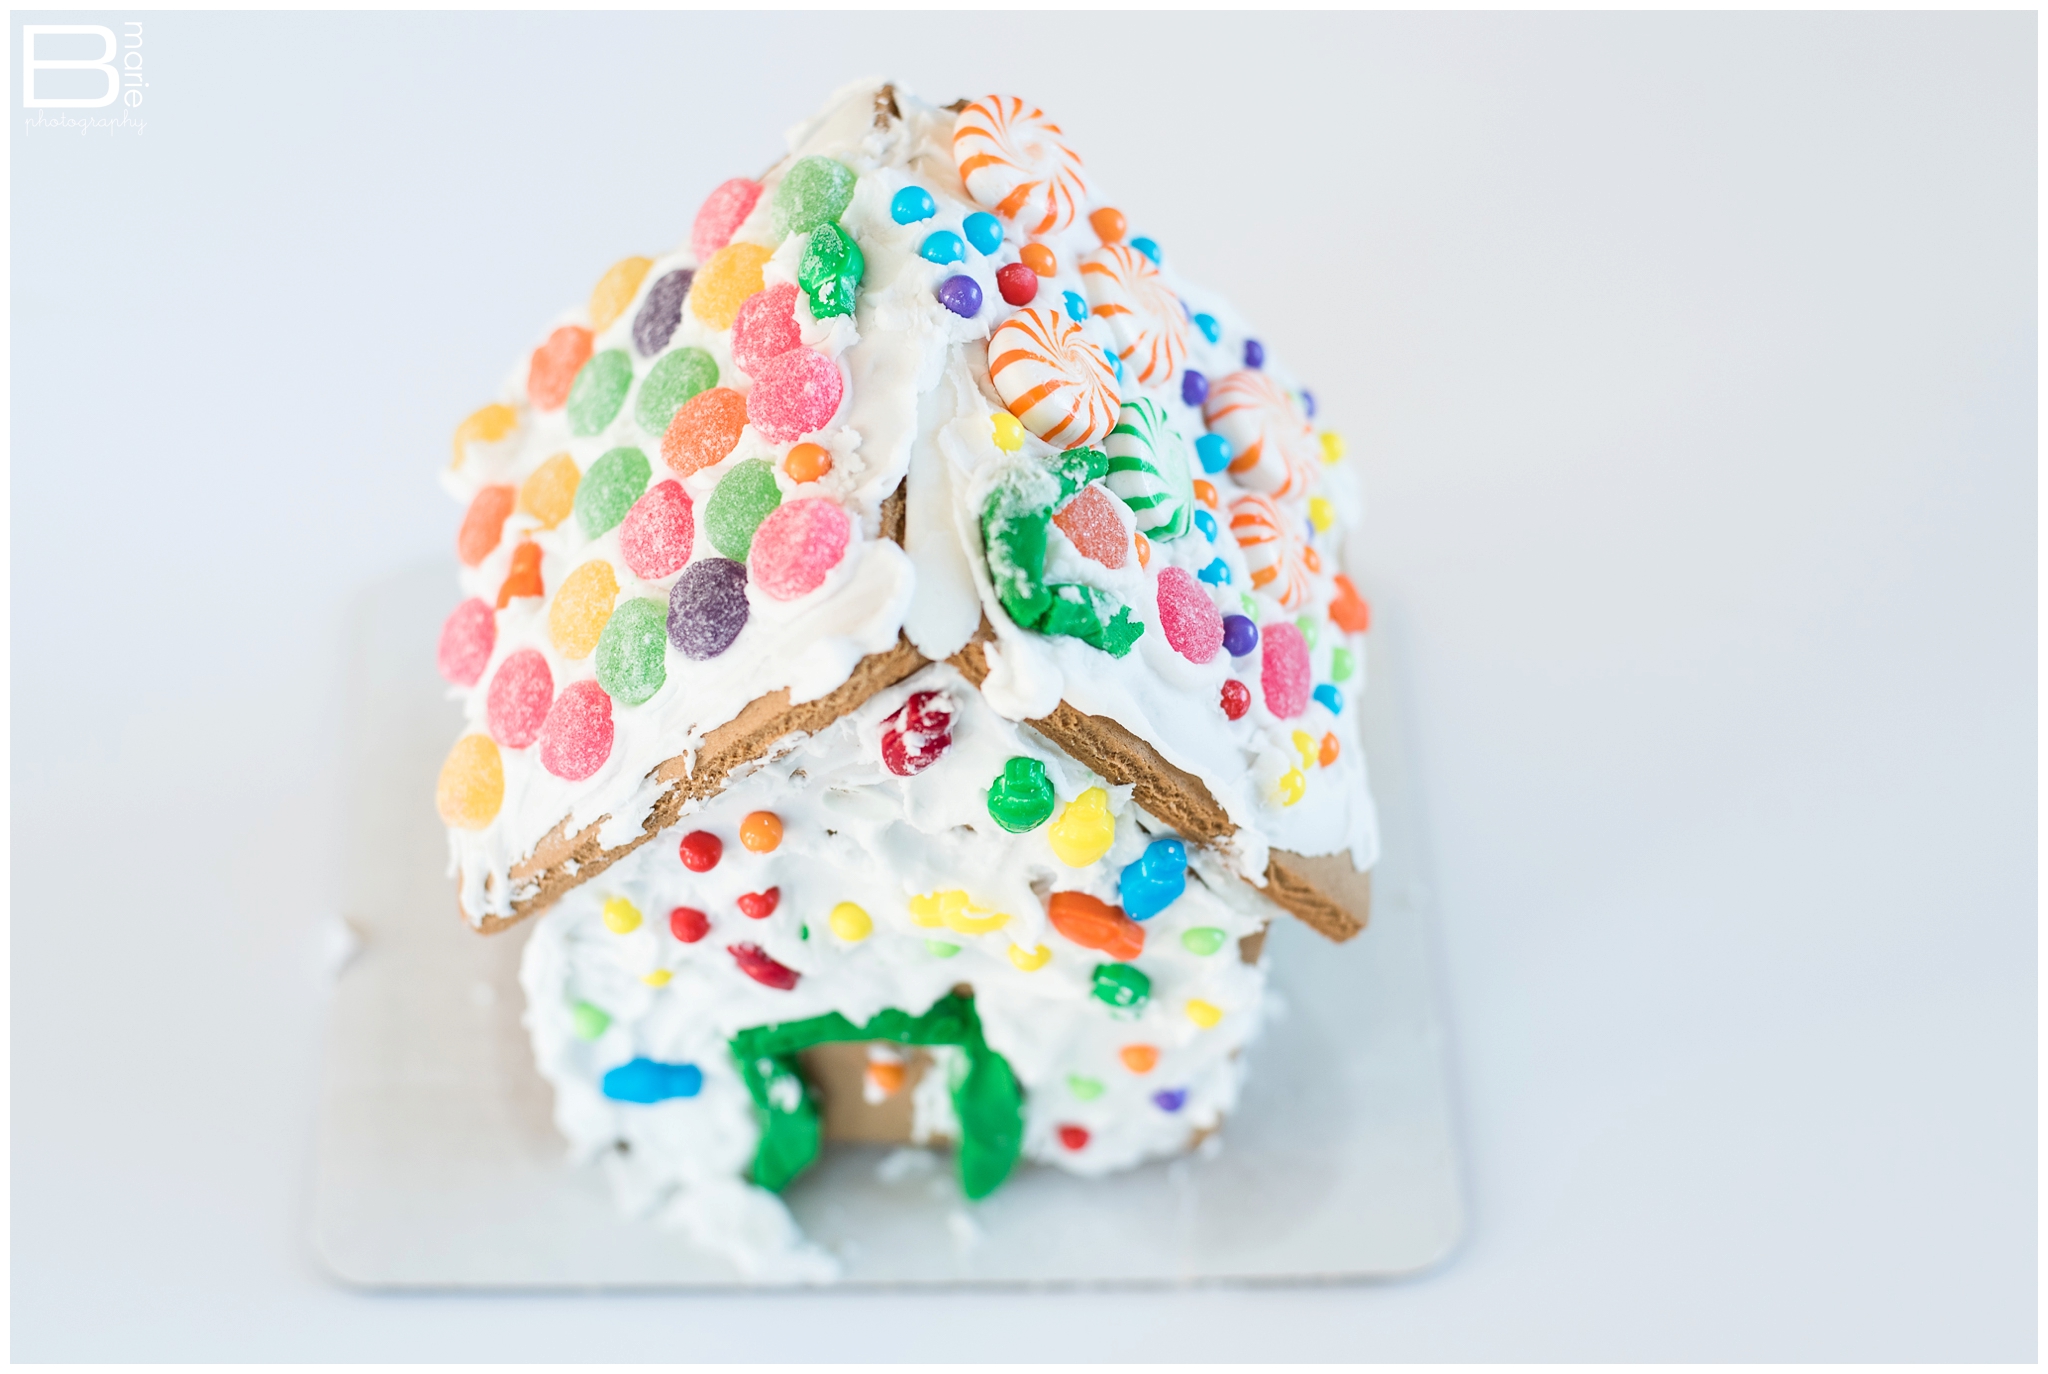 Kingwood family photographer image of gingerbread house decorated by daughter